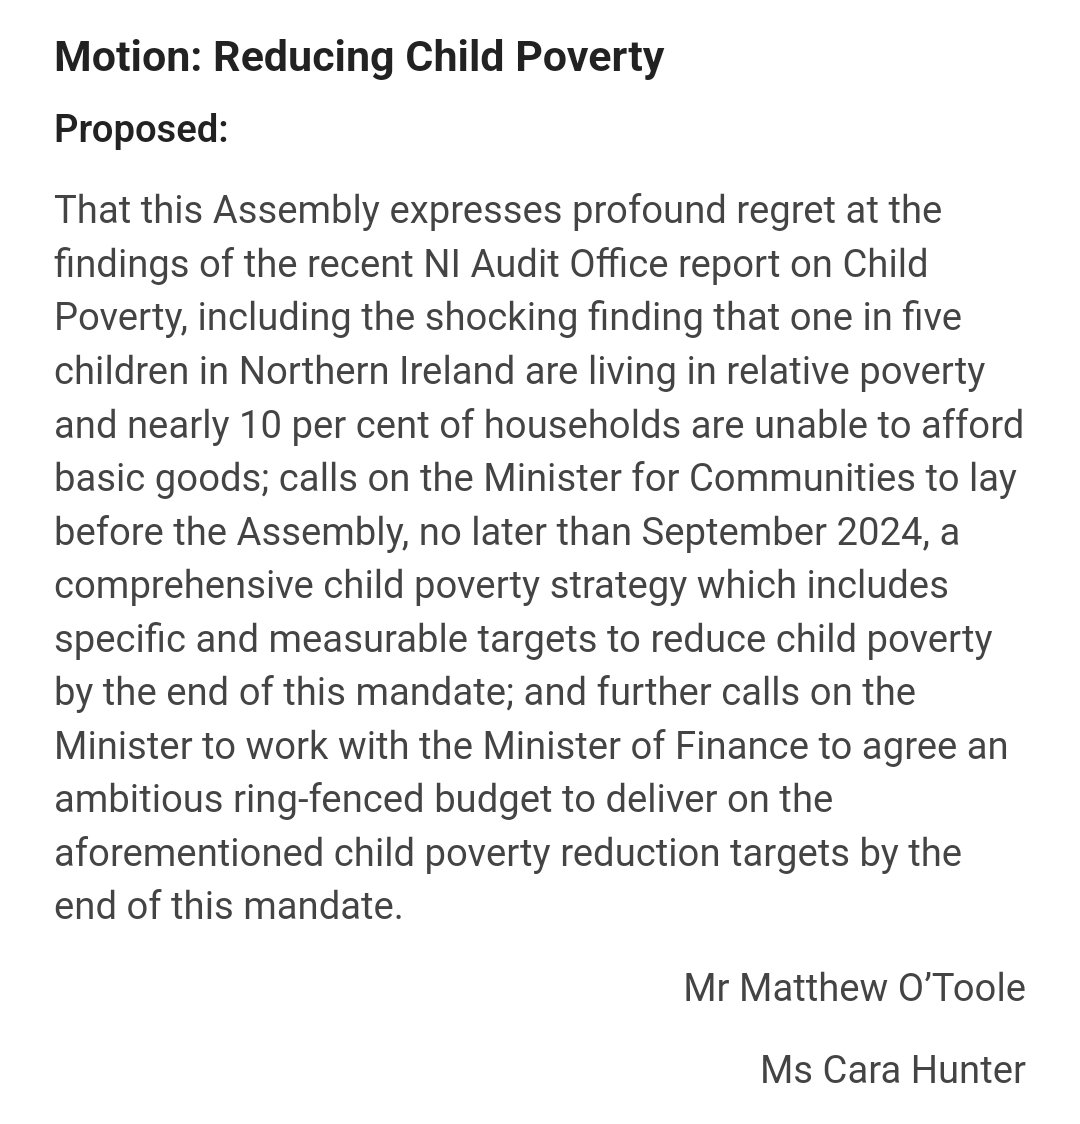 Our first proposal, debated tomorrow, is for a binding Exec target to reduce child poverty by the end of this Assembly mandate.

This couldn't be more pressing with the recent NI Audit Office report highlighting one in five NI kids living in poverty.

So how do we go about this?